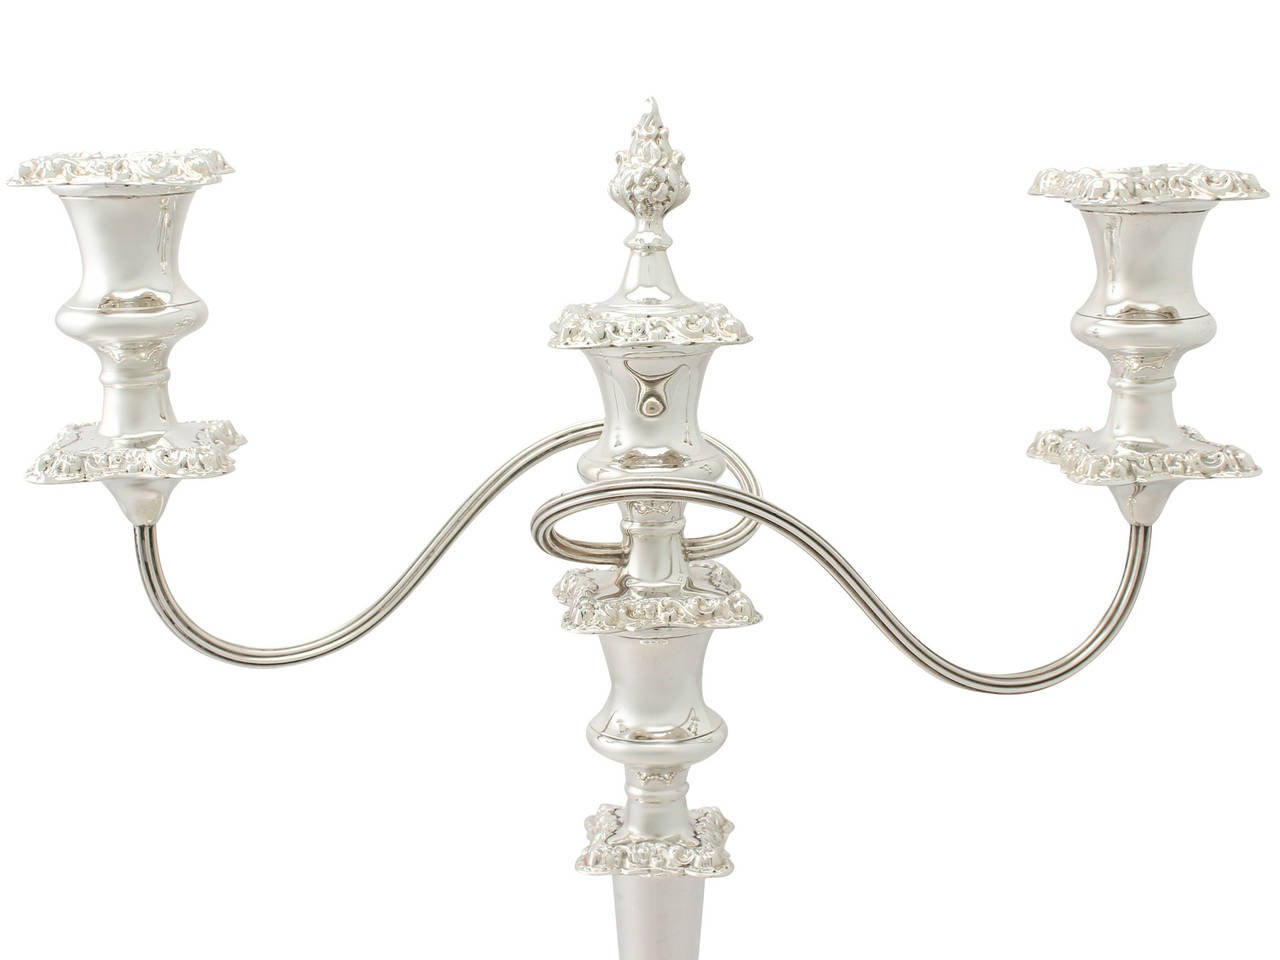 Late 20th Century Sterling Silver Three-Light Candelabras or Centerpiece, Vintage